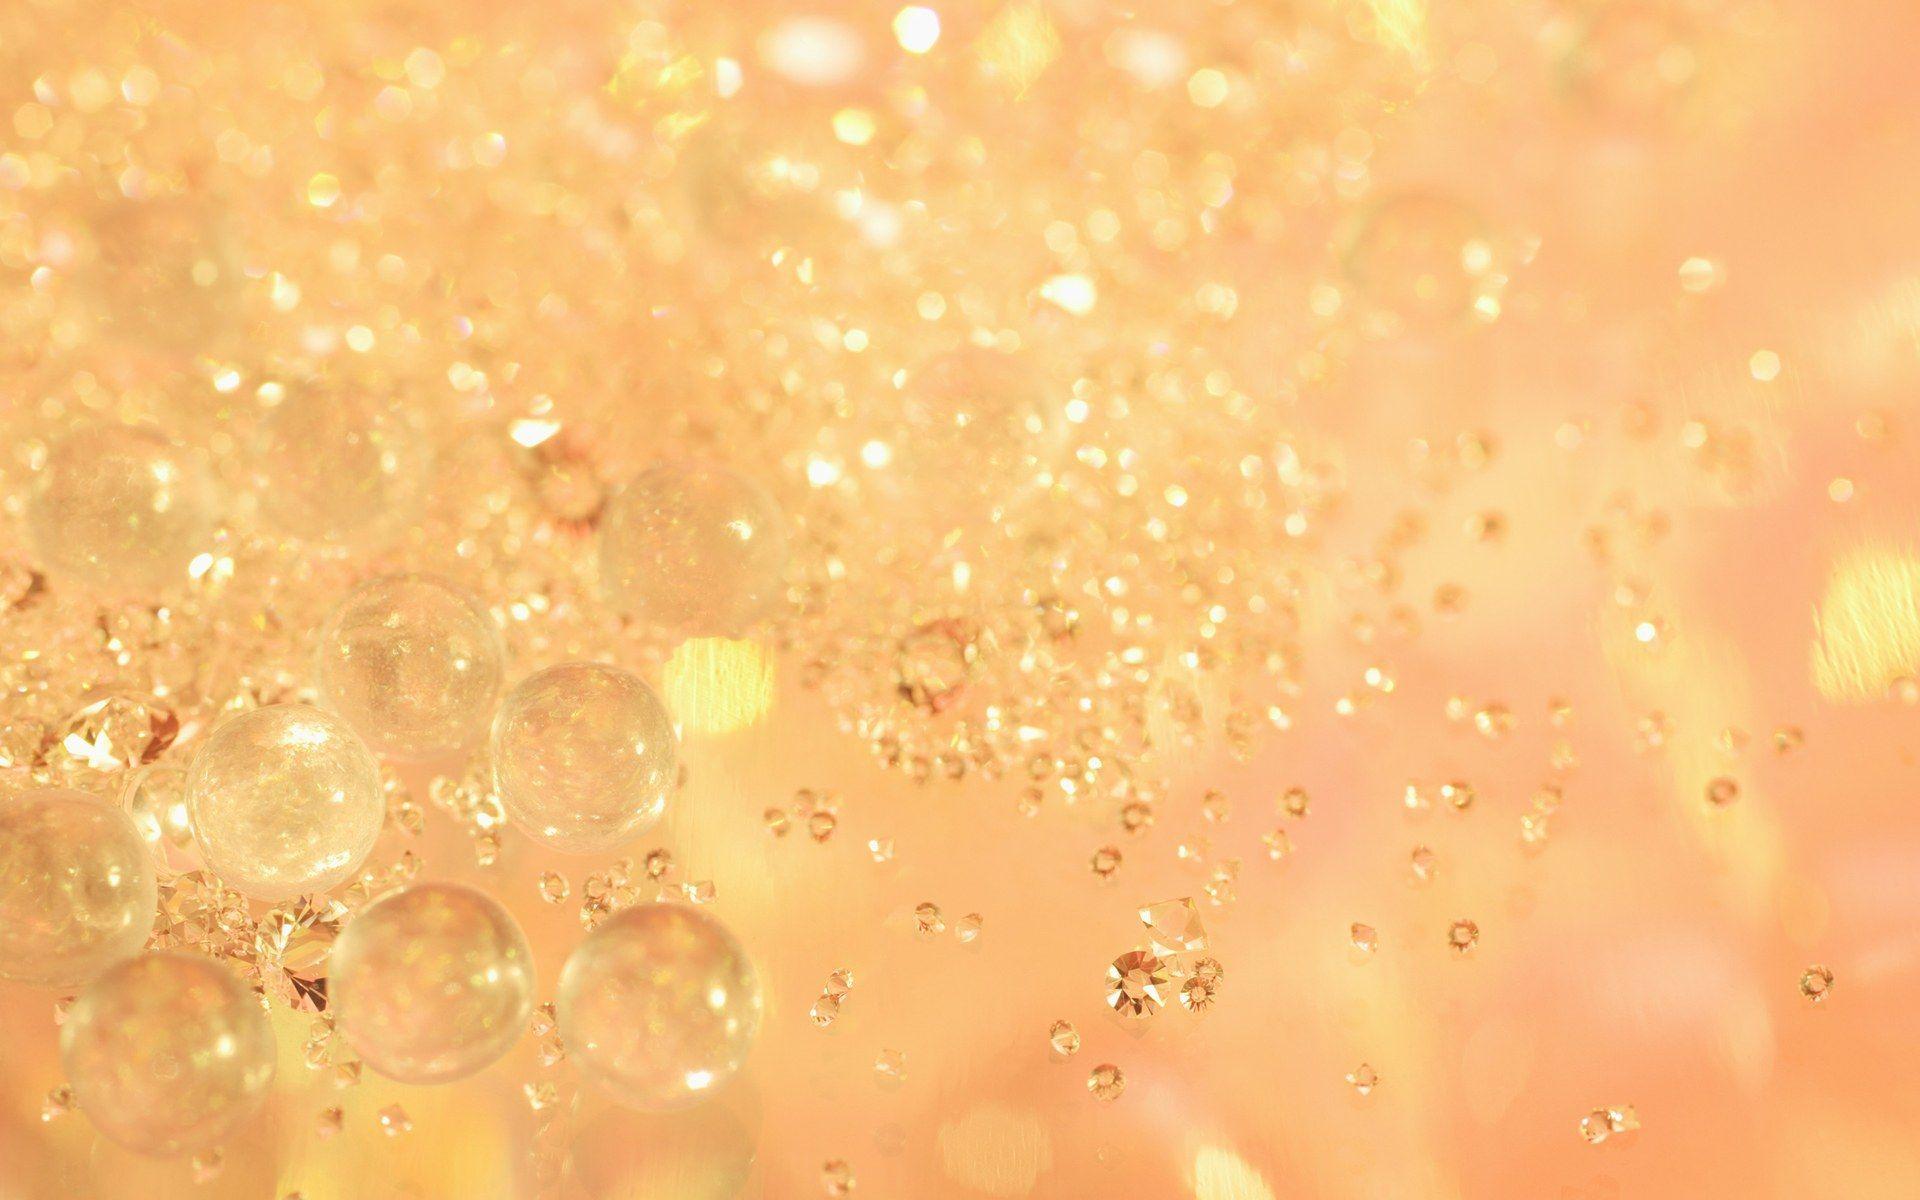 Sparkling and Romantic Background HK015 350A Wallpaper